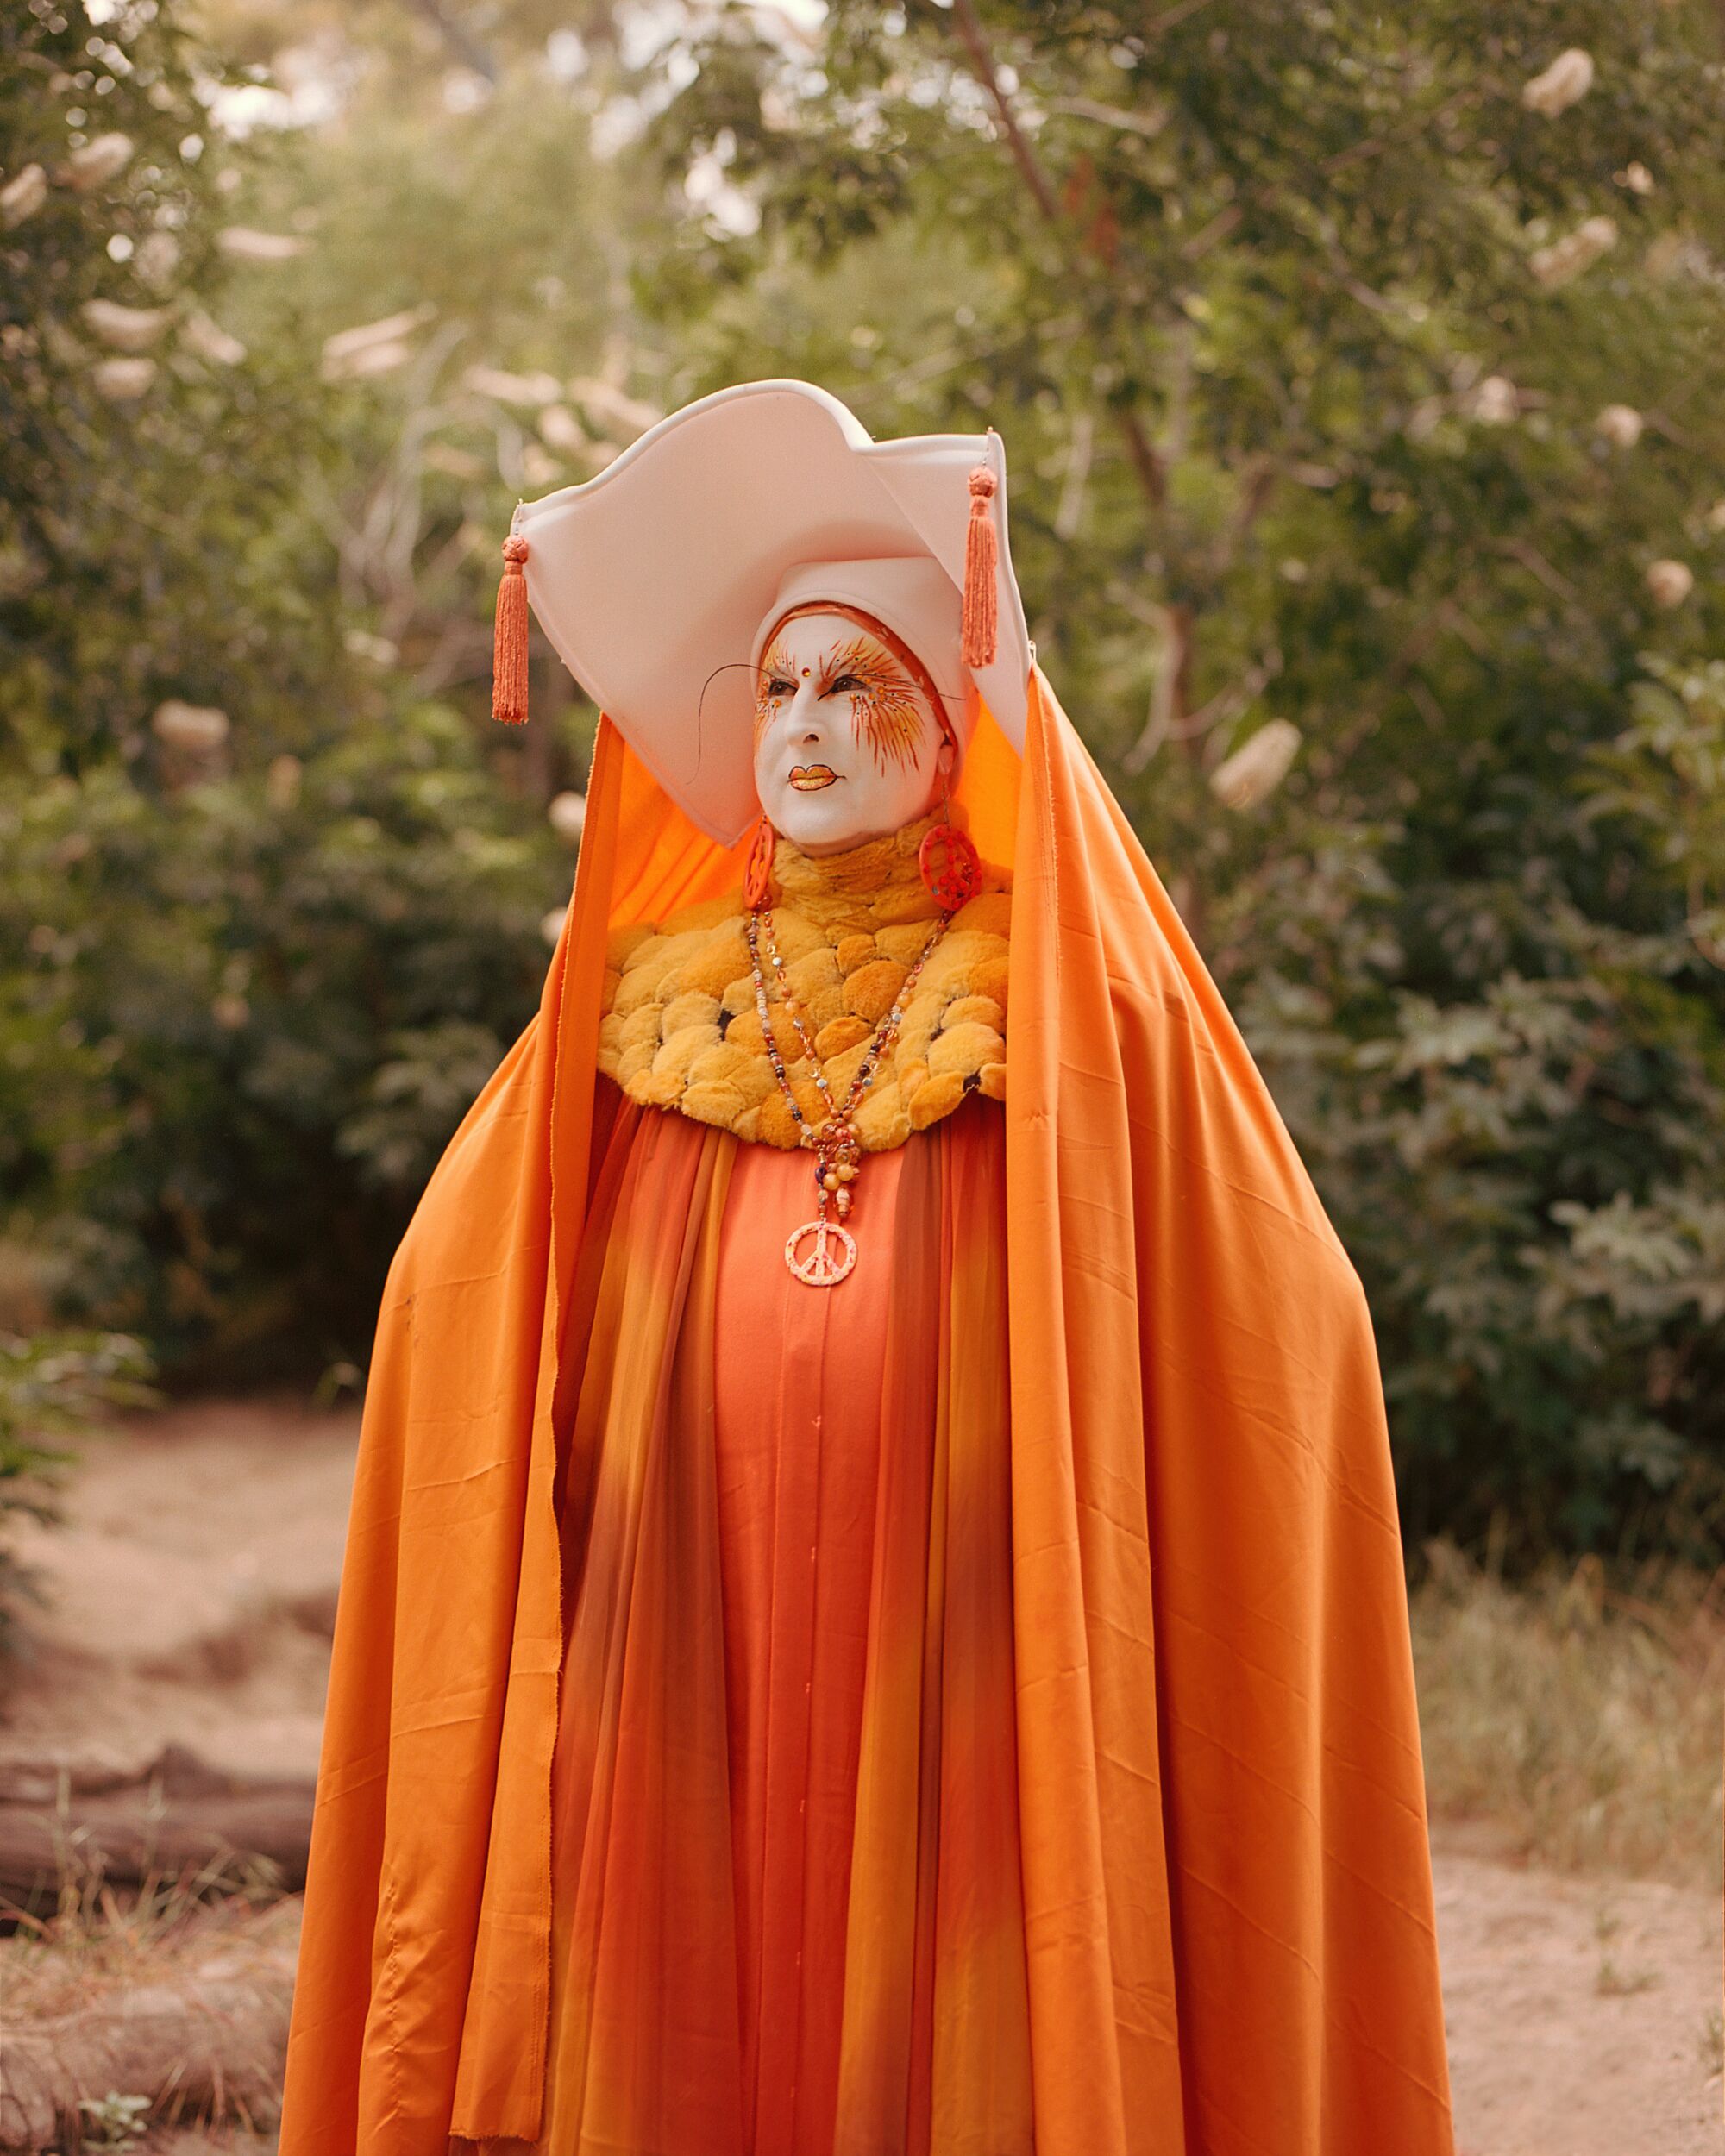 A white-faced scissors nun, wearing a delicate orange robe and robe.